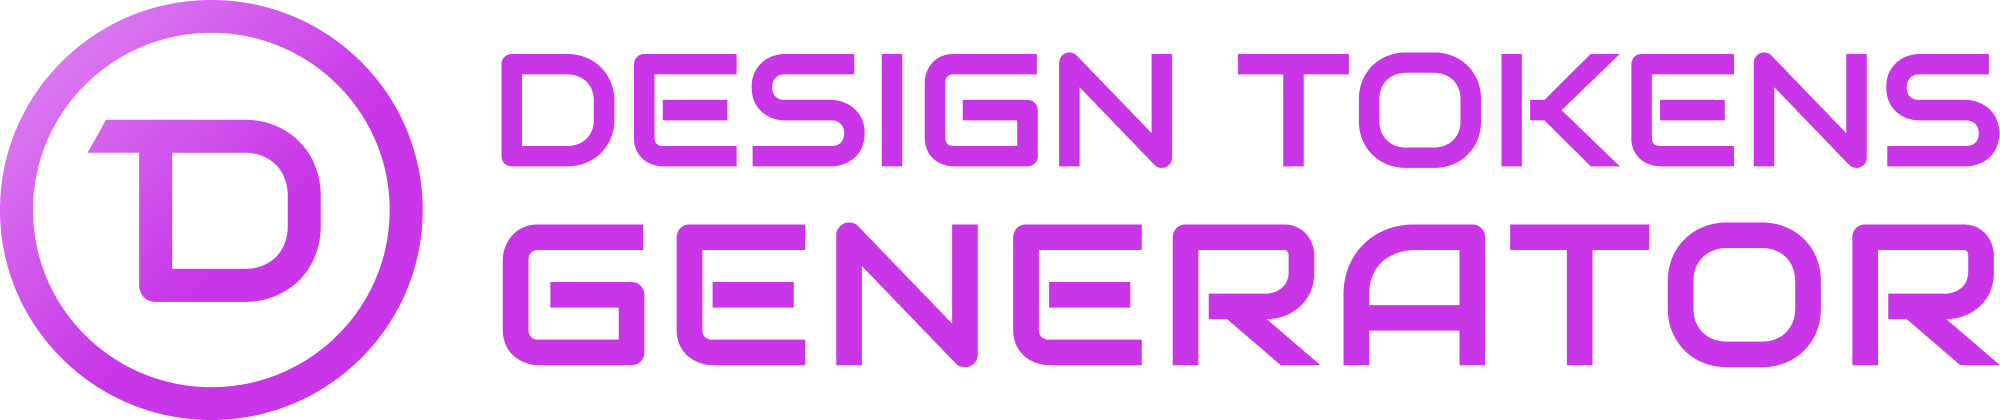 Design Tokens Generator logo with wording on the side